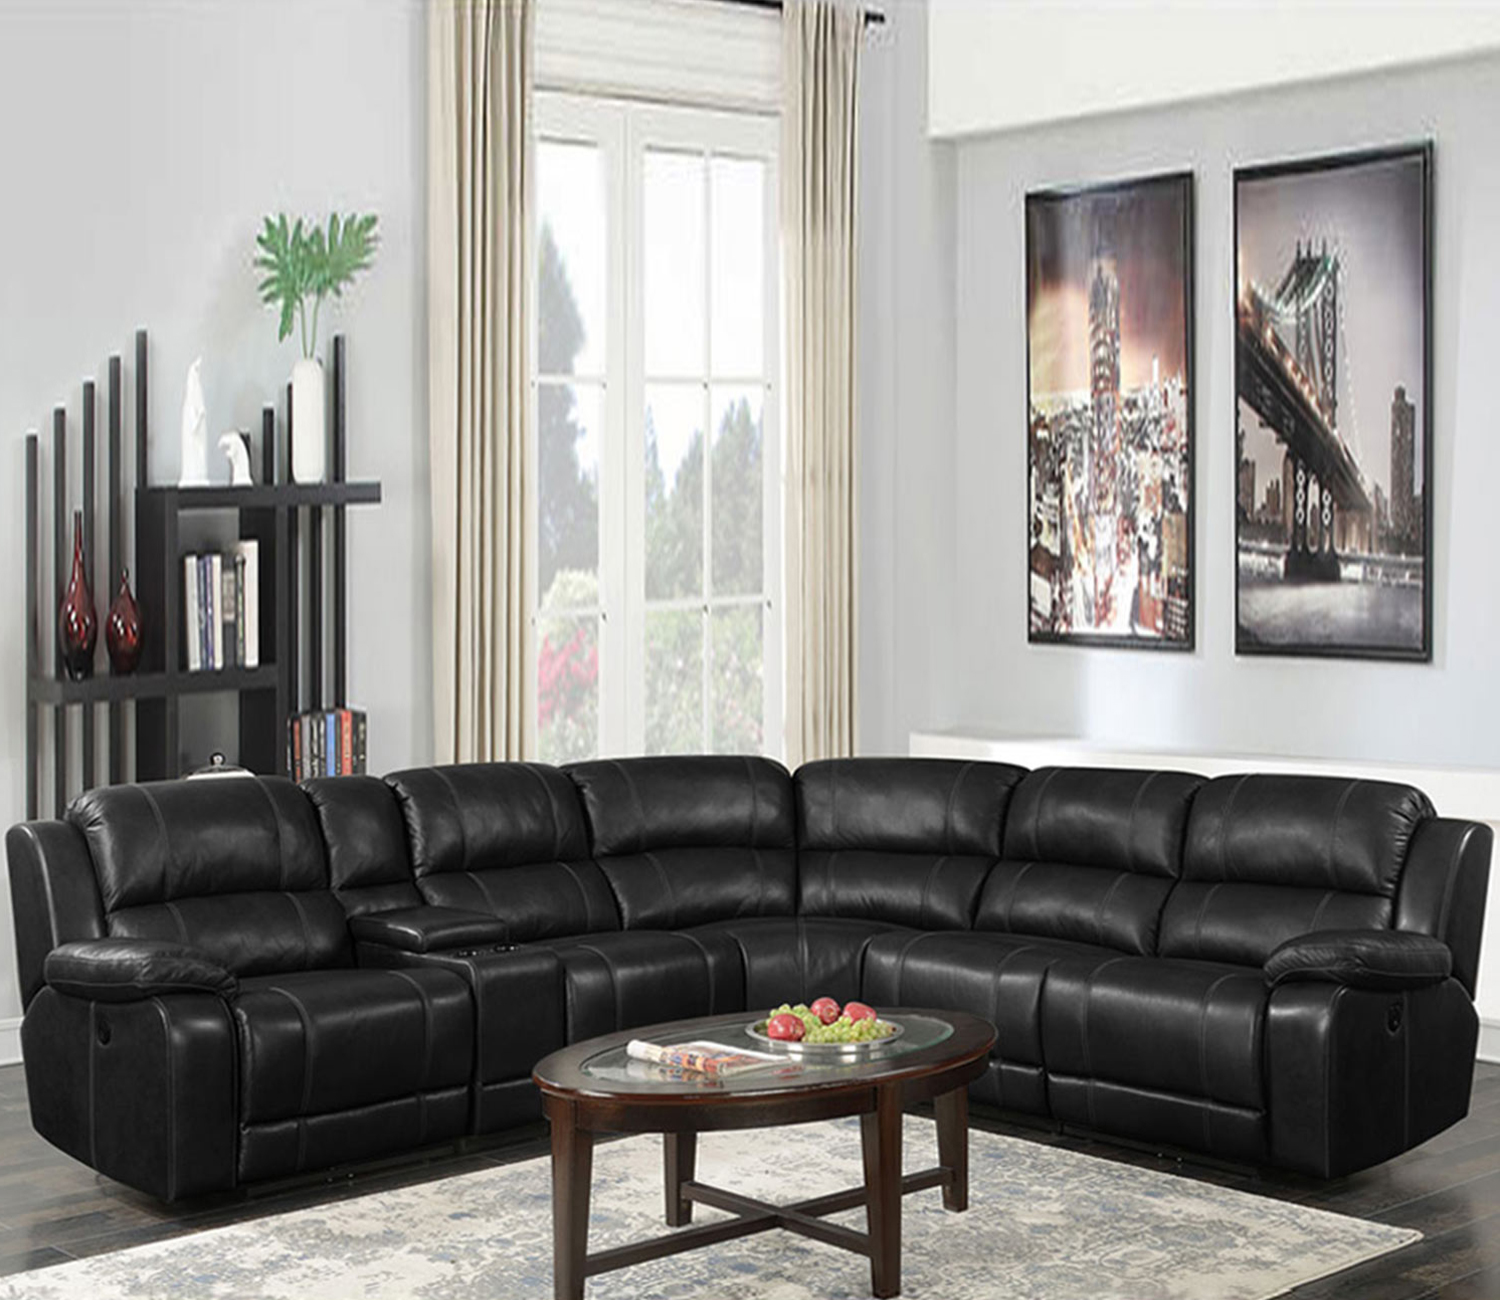 Enhancing Your Living Space with a Black Recliner Sofa插图4